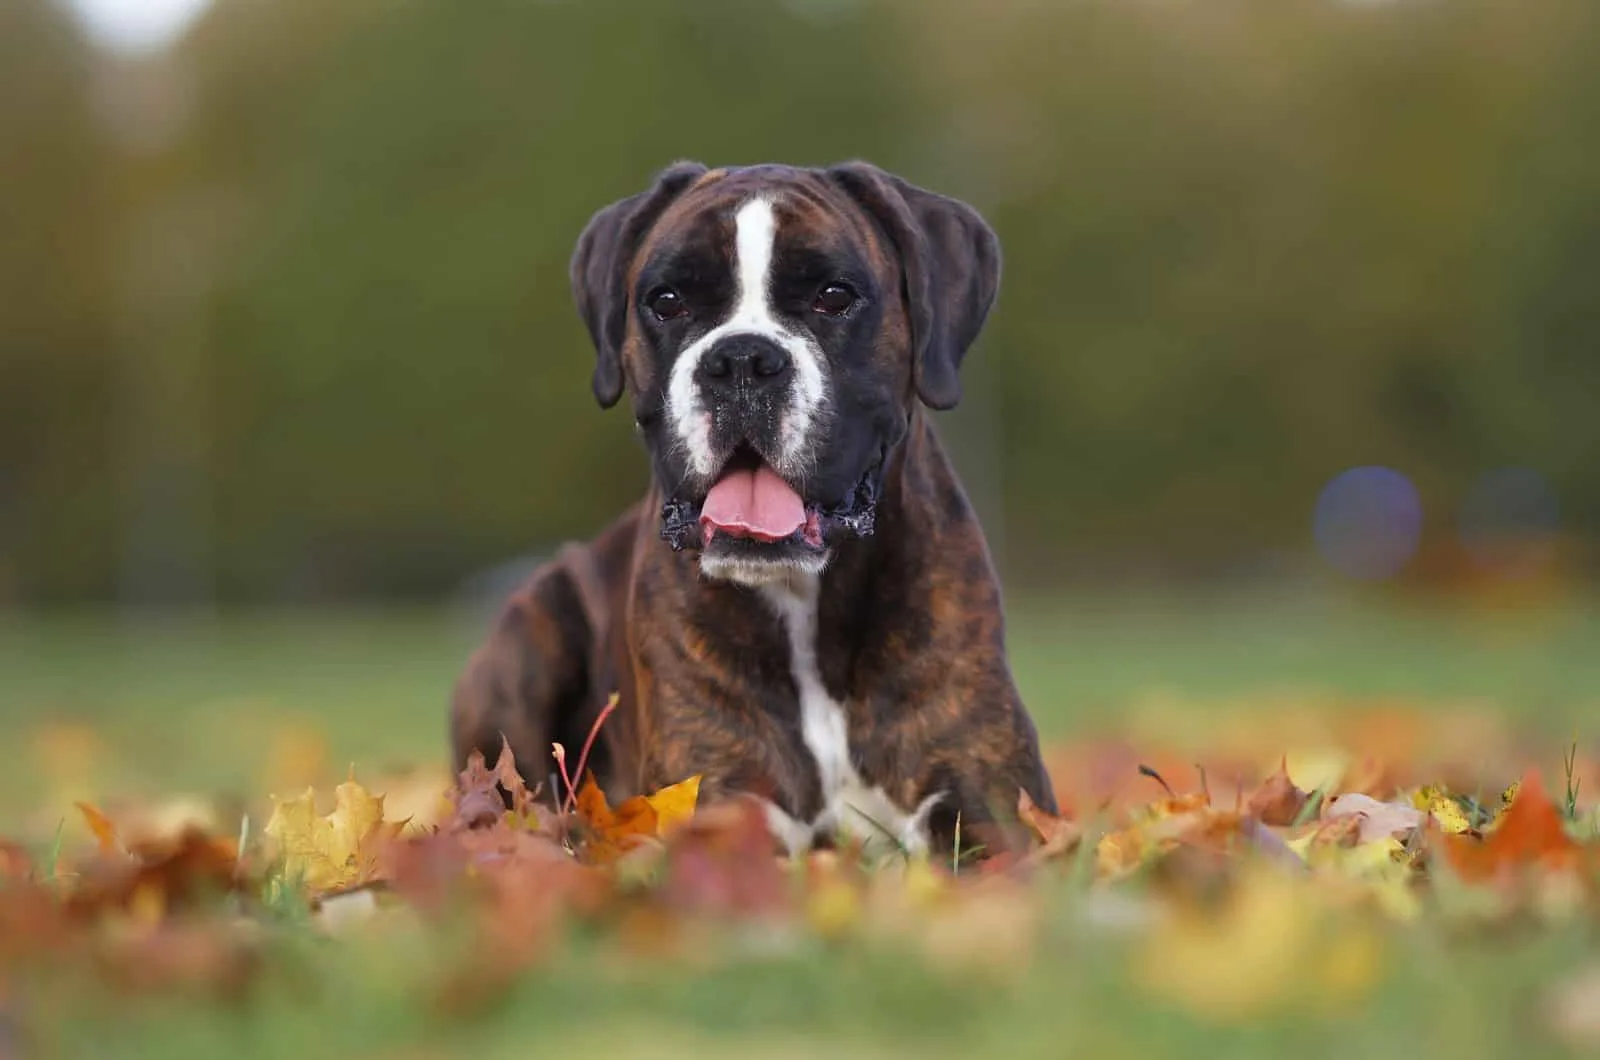 boxer lies down in grass and leaves